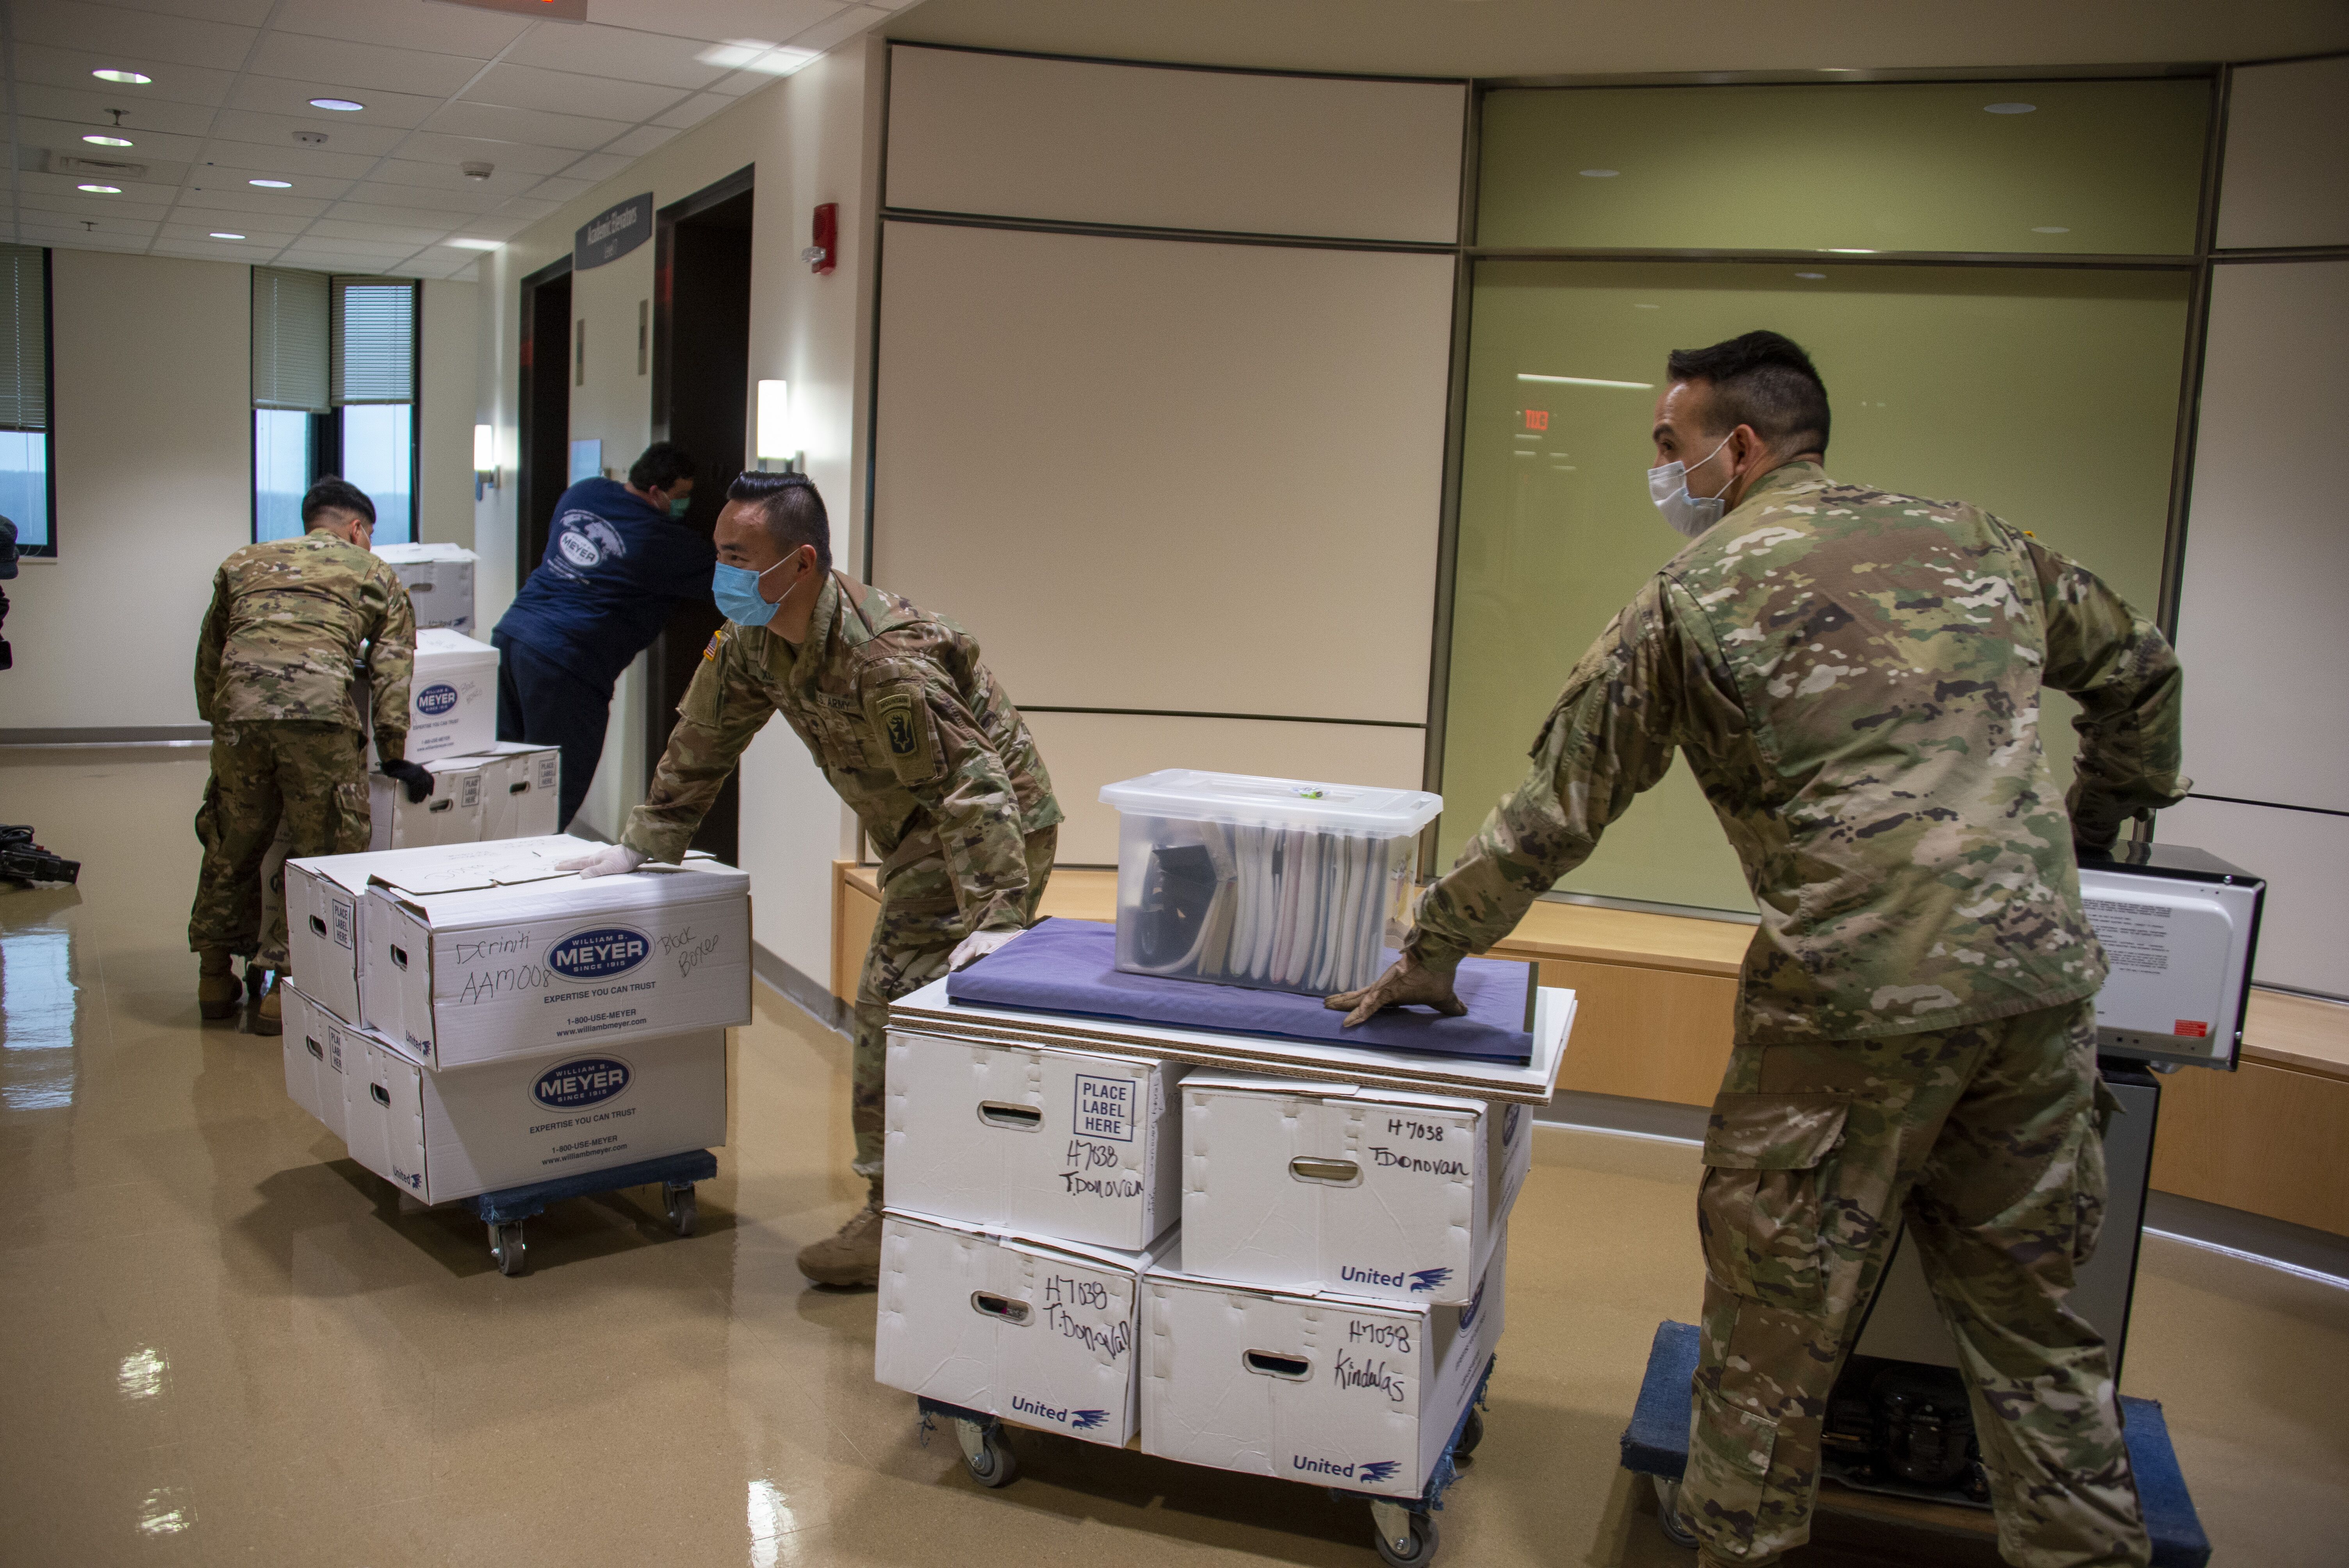 Members of the Connecticut National Guard came to UConn Health to help clean out offices and set up hospital rooms in the Connecticut Tower of UConn John Dempsey Hospital. April 13, 2020 (Tina Encarnacion/UConn Health photo)